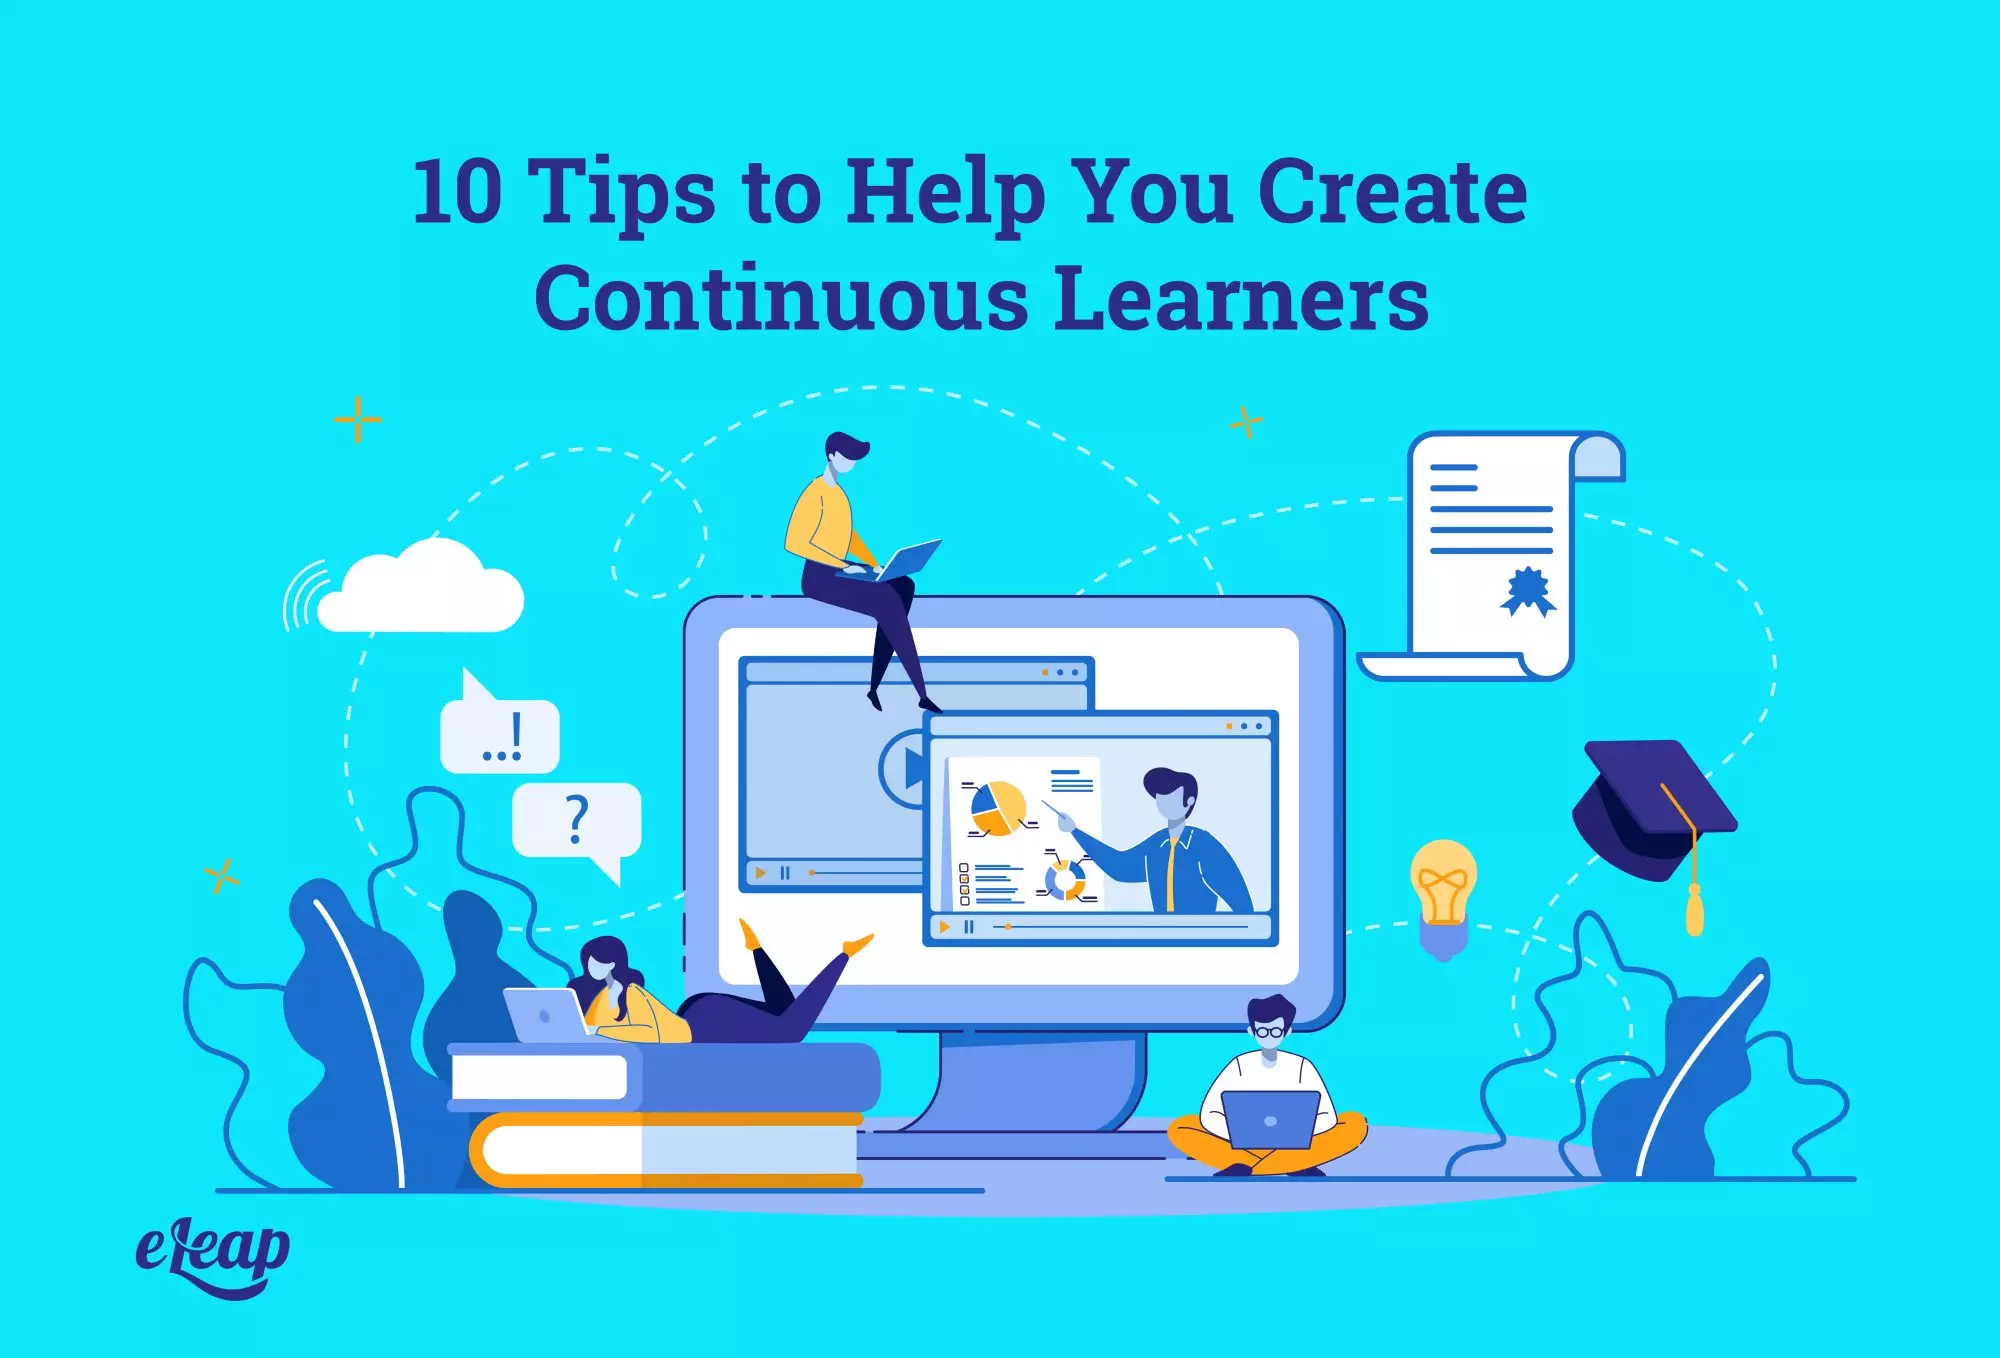 10 Tips to Help You Create Continuous Learners